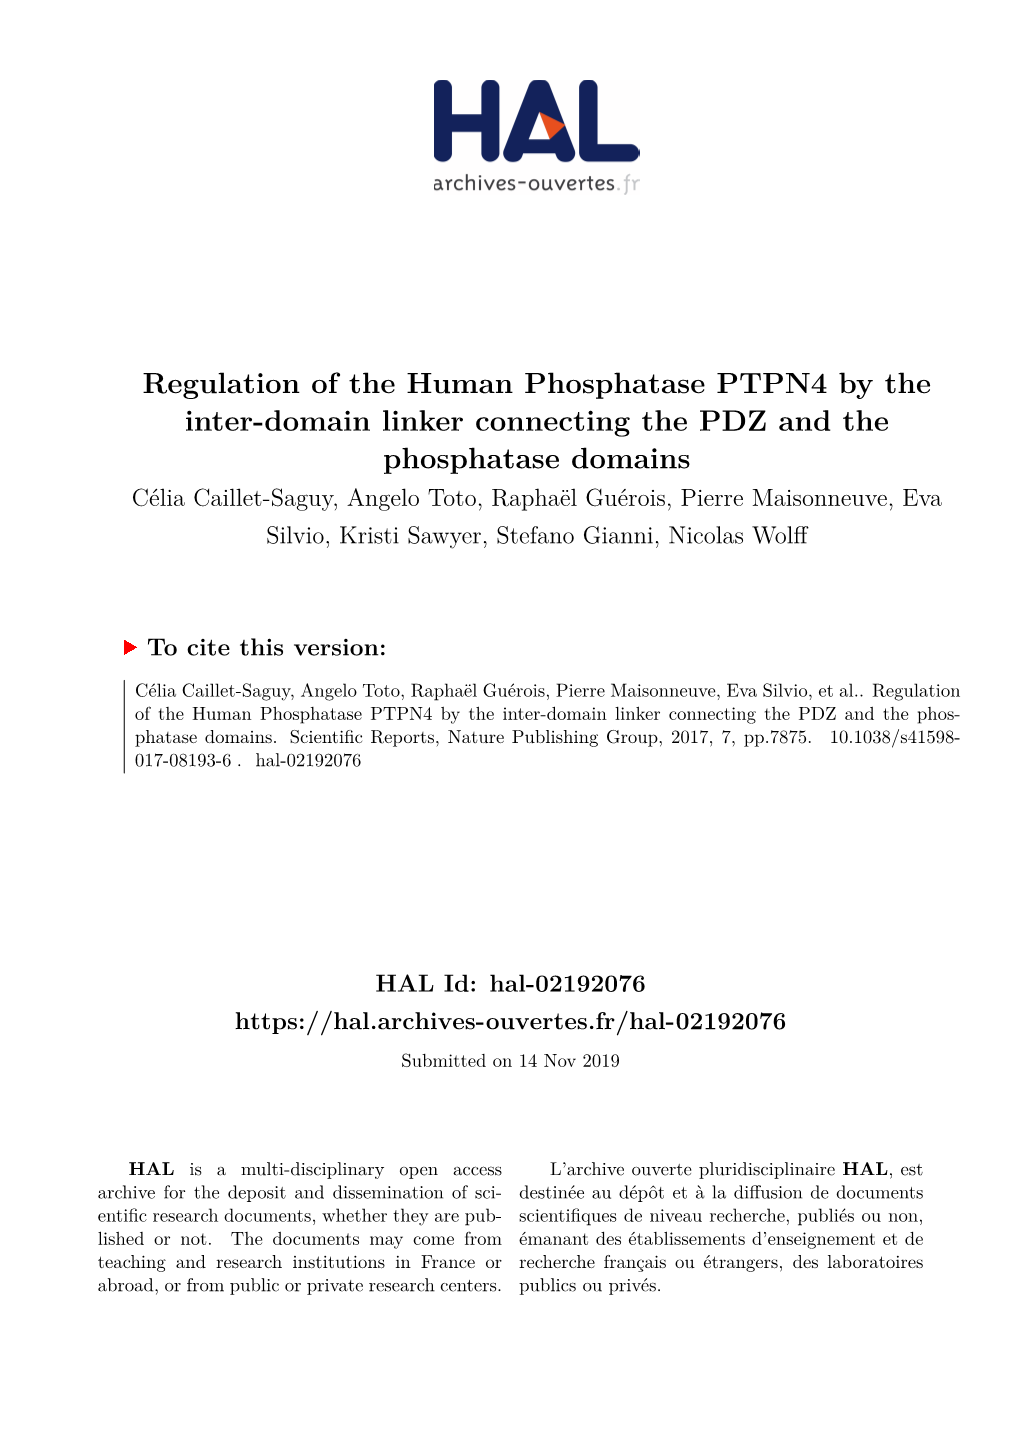 Regulation of the Human Phosphatase PTPN4 by the Inter